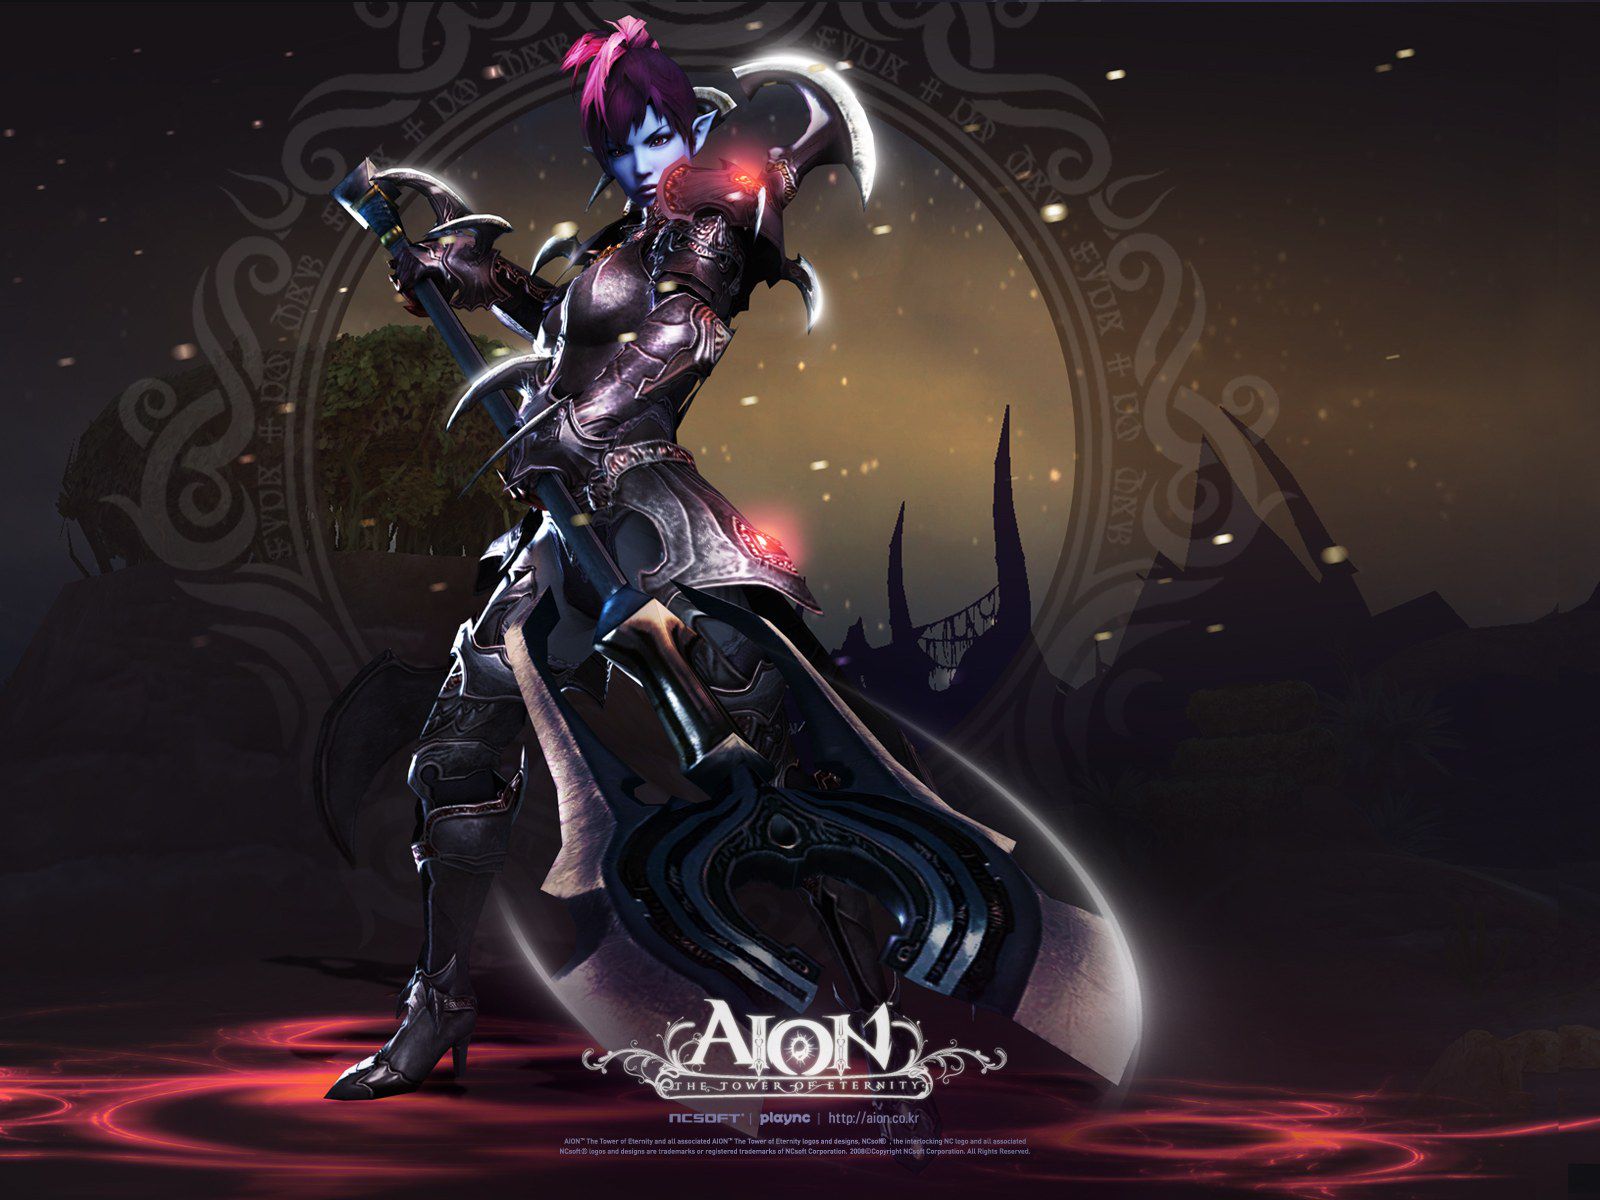 Download_Aion_Full_HD_Wallpapers-cgfrog_com_21